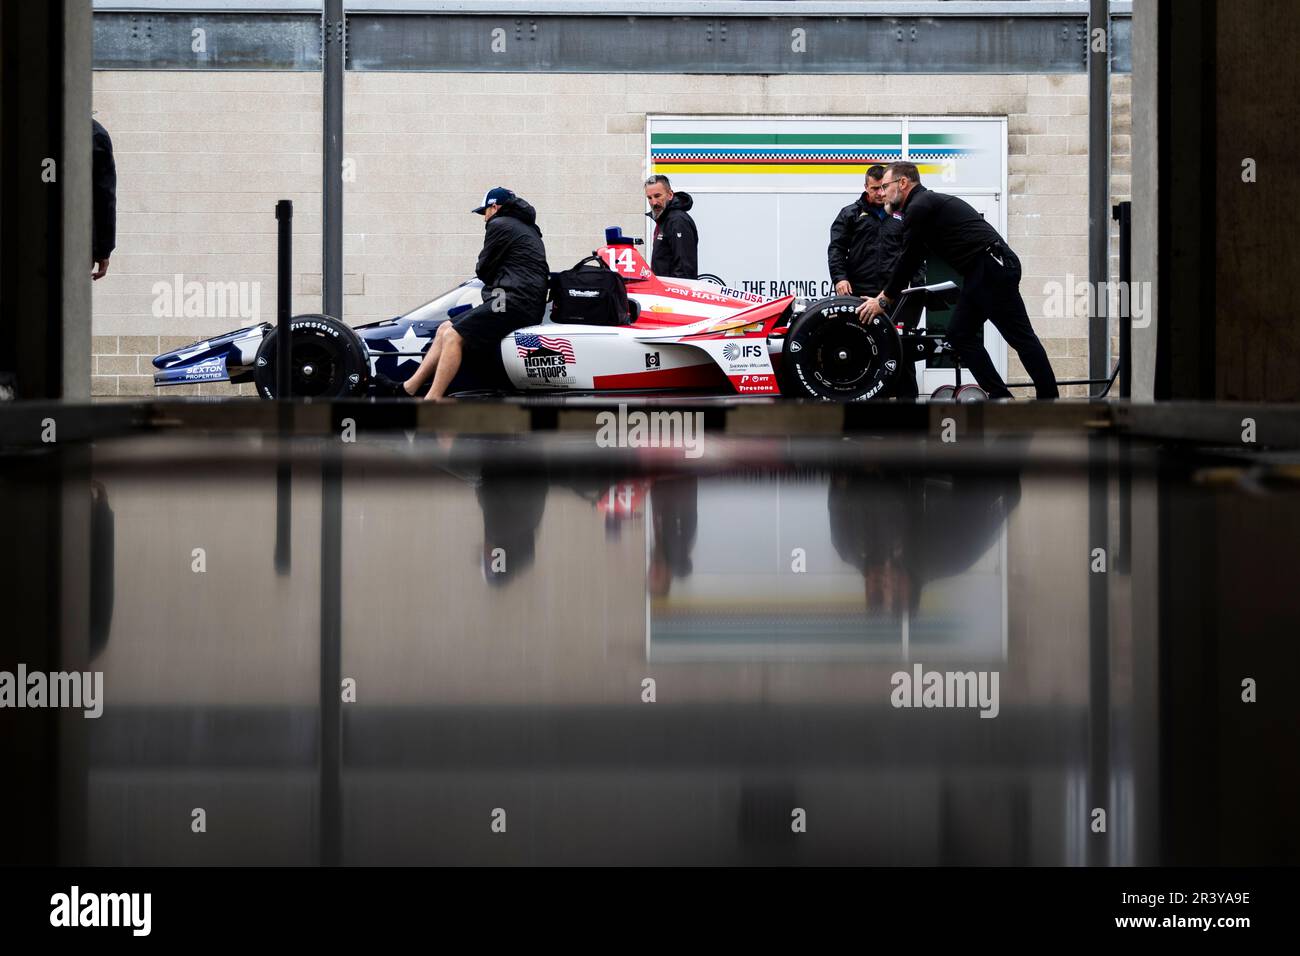 The crew of AJ Foyt racing prepares their race car prior to a practice for the Indianapolis 500 at Indianapolis Motor Speedway in Speedway IN.(Credit Image: © Colin Mayr Grindstone Media Group/Action Sports Photography/Cal Sport Media) Stock Photo